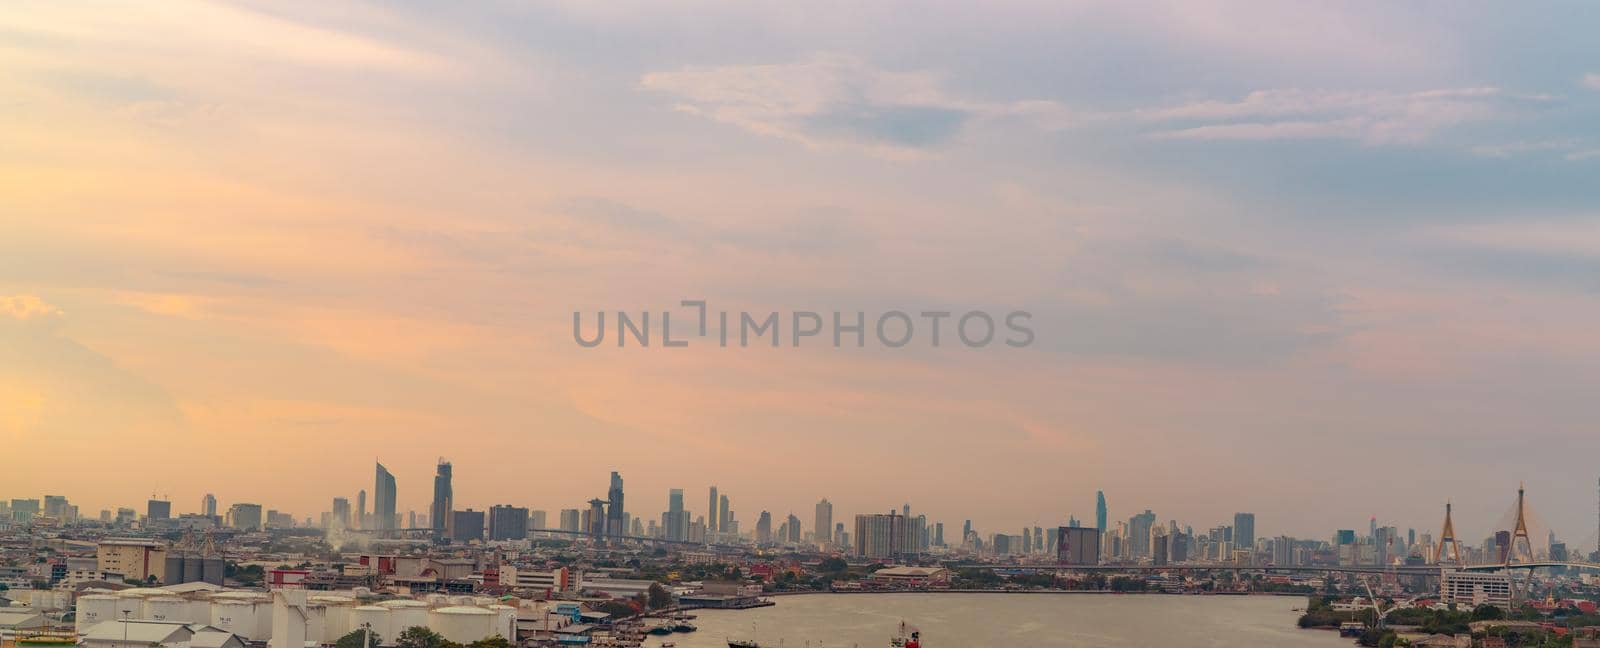 Cityscape of modern building. Cityscape in Asia. Business office building. City with sunset sky. Horizontal view of city with crowd of skyscraper building and the river. Capital city in Thailand.